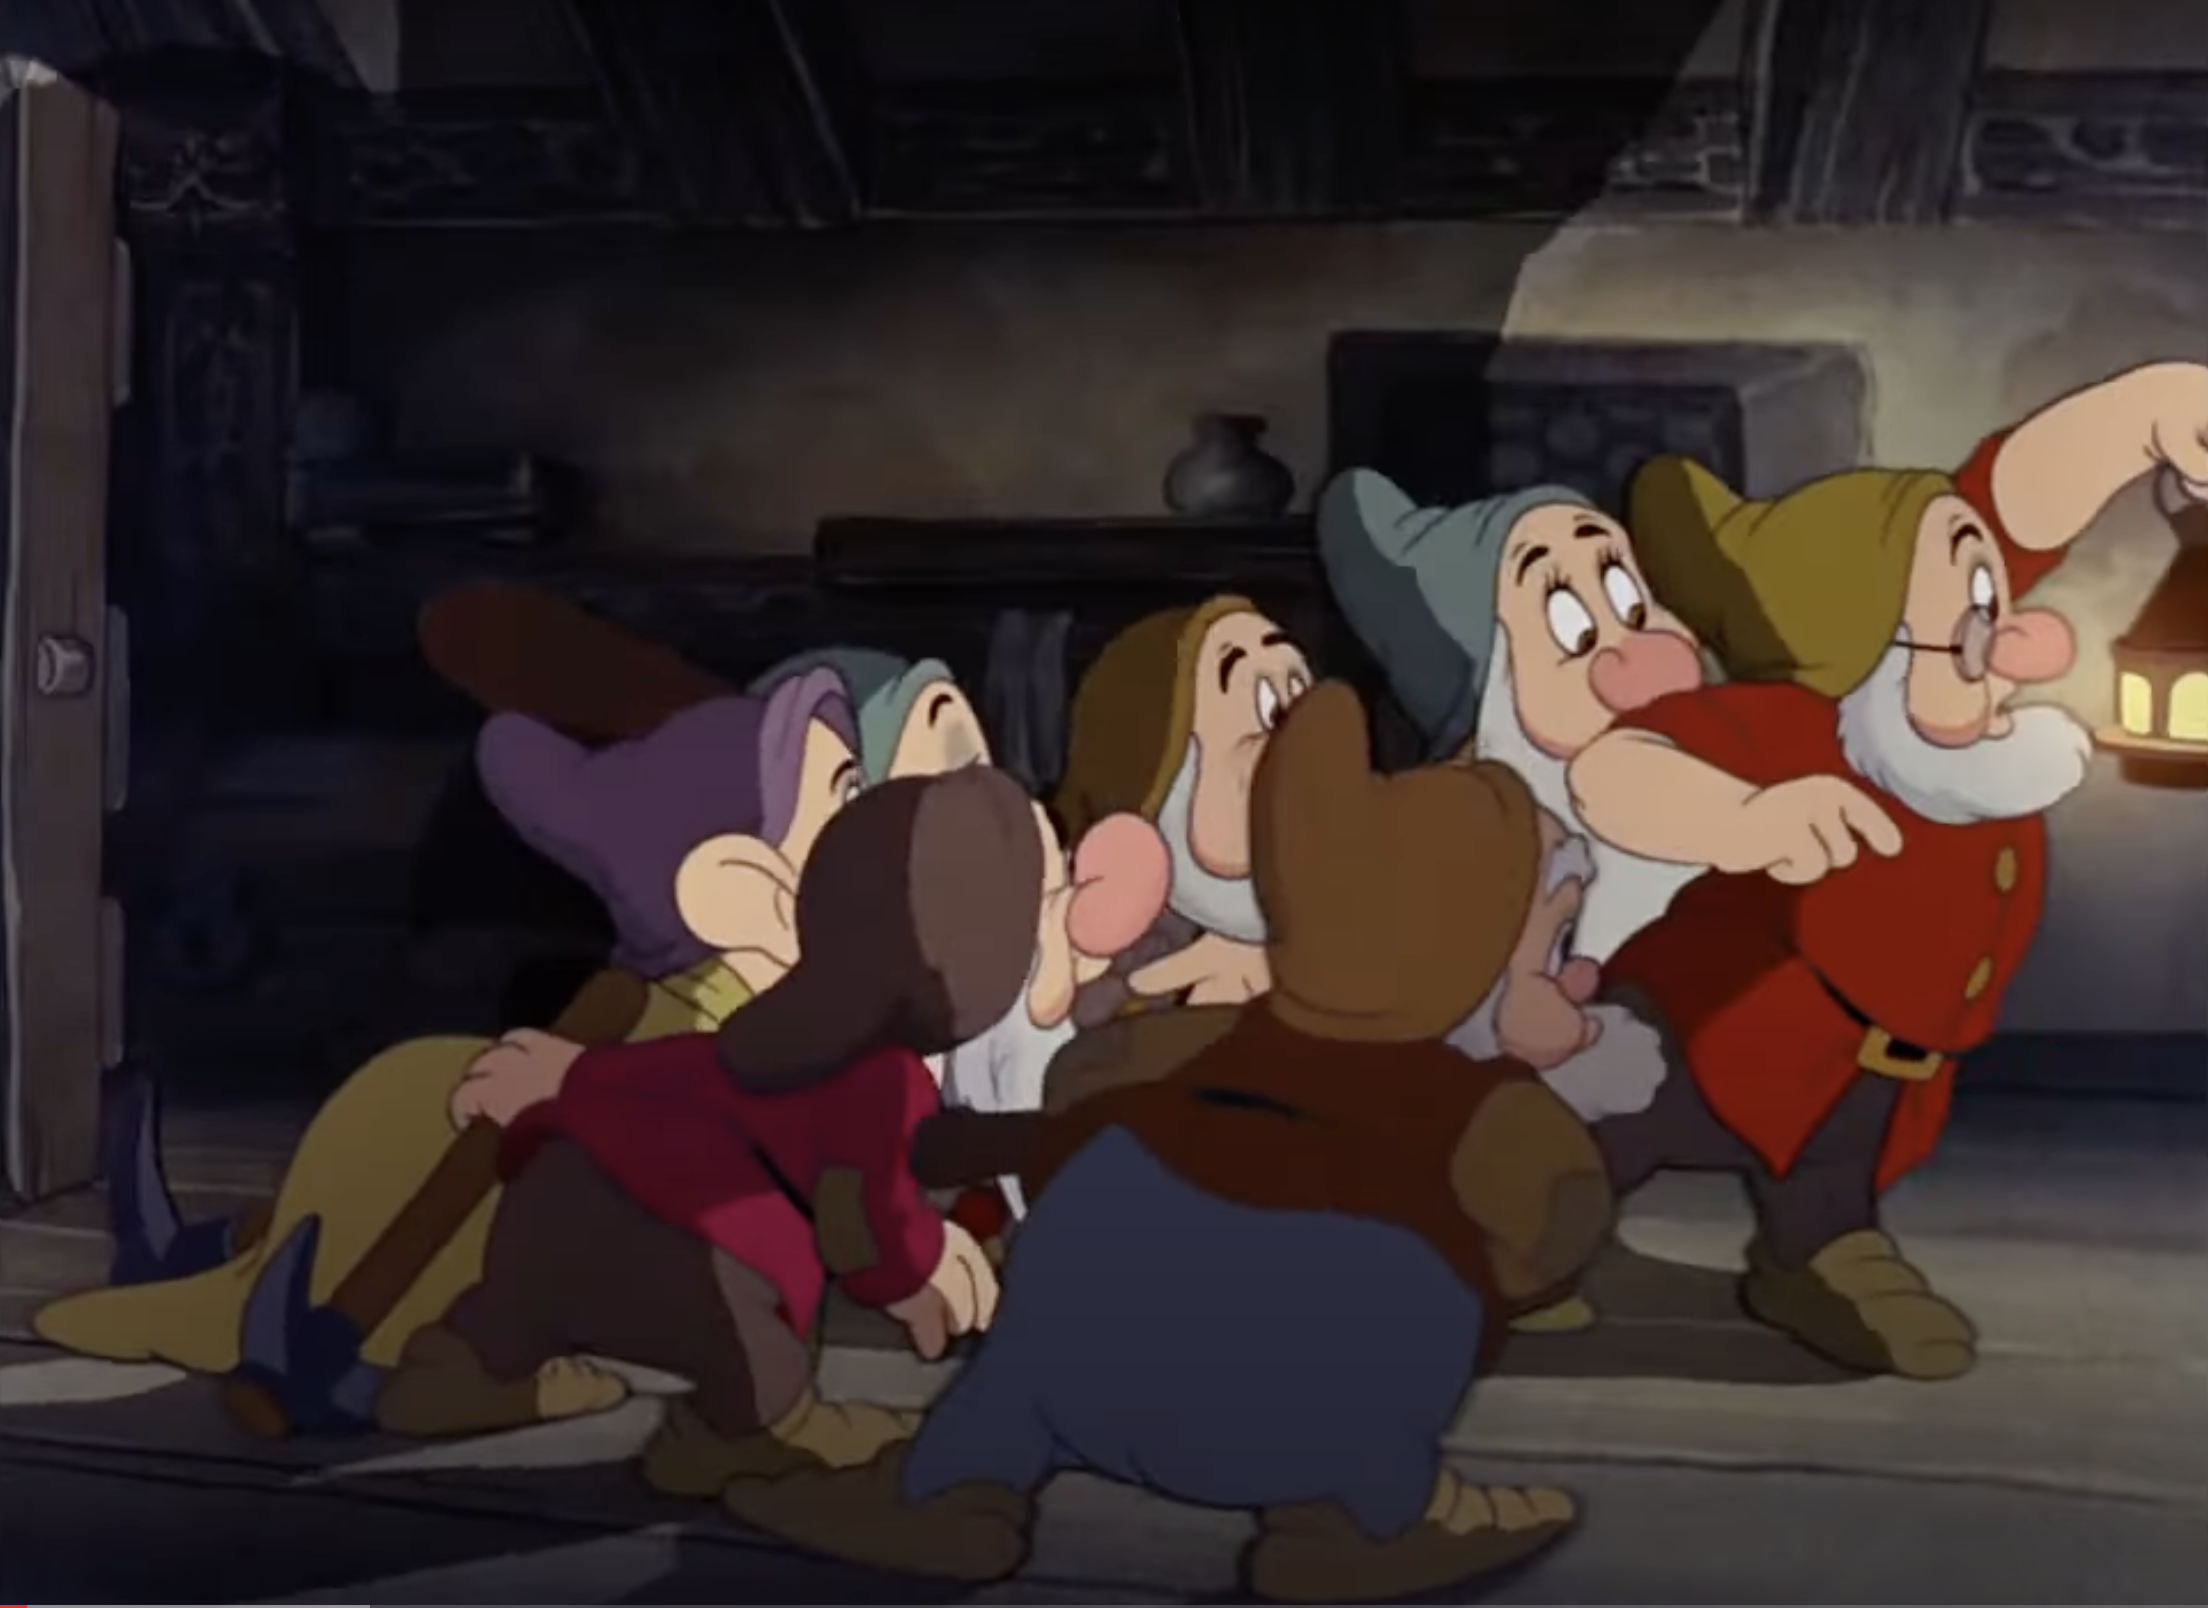 seven dwarfs from Snow White and the Seven Dwarfs